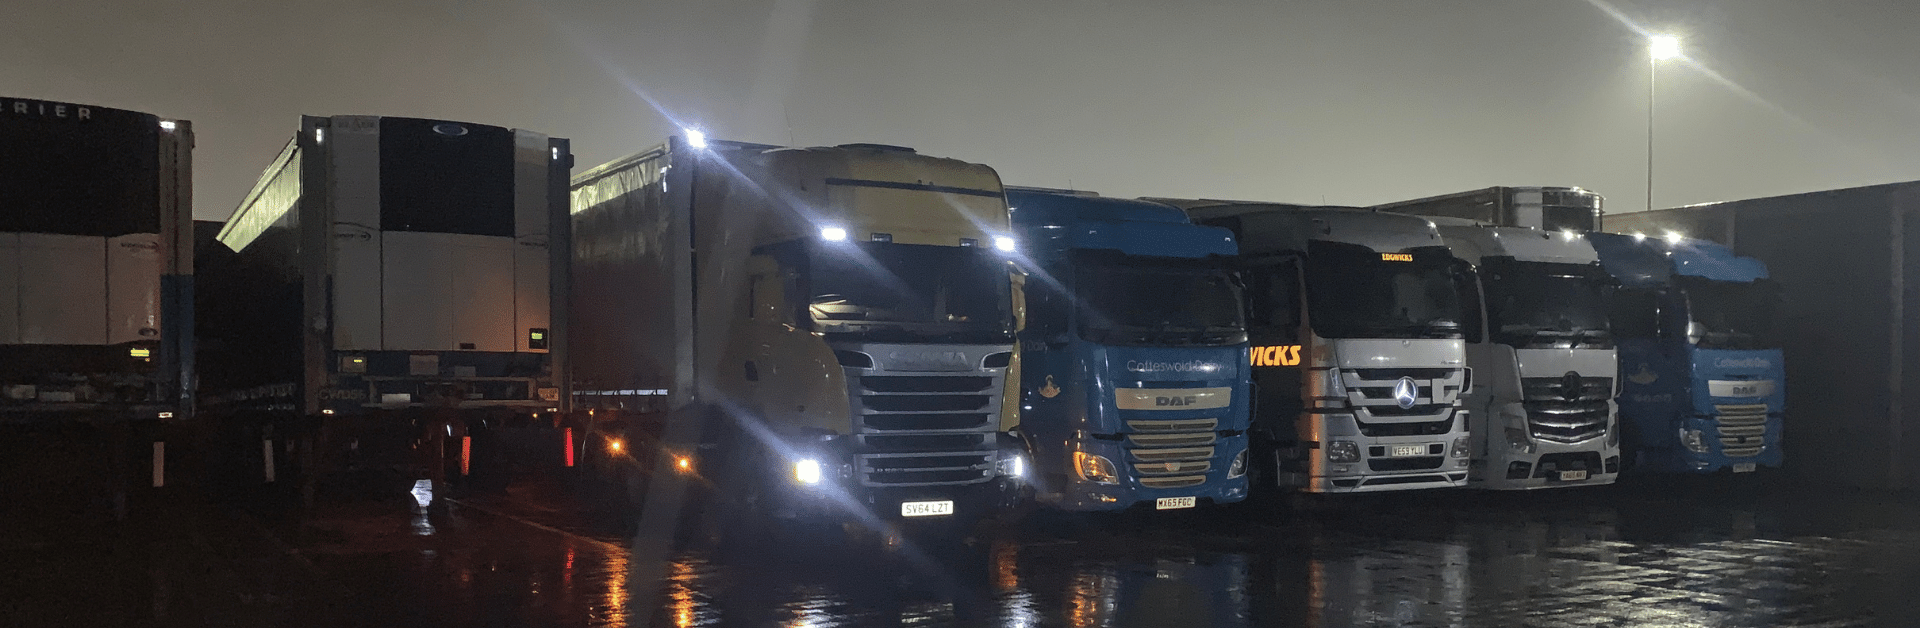 Line of stationary lorries at night